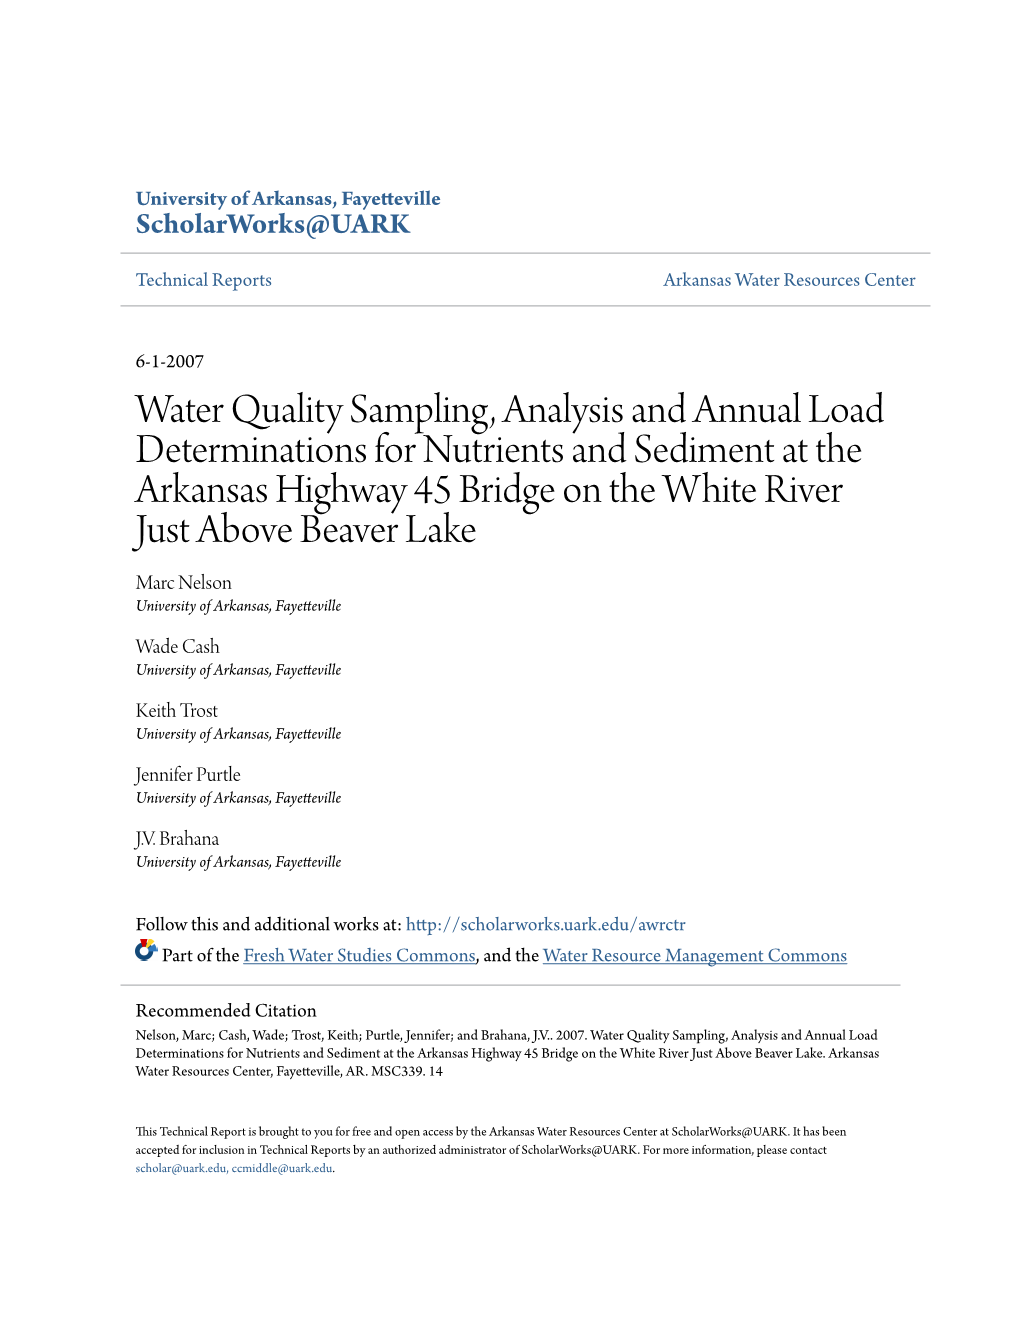 Water Quality Sampling, Analysis and Annual Load Determinations For